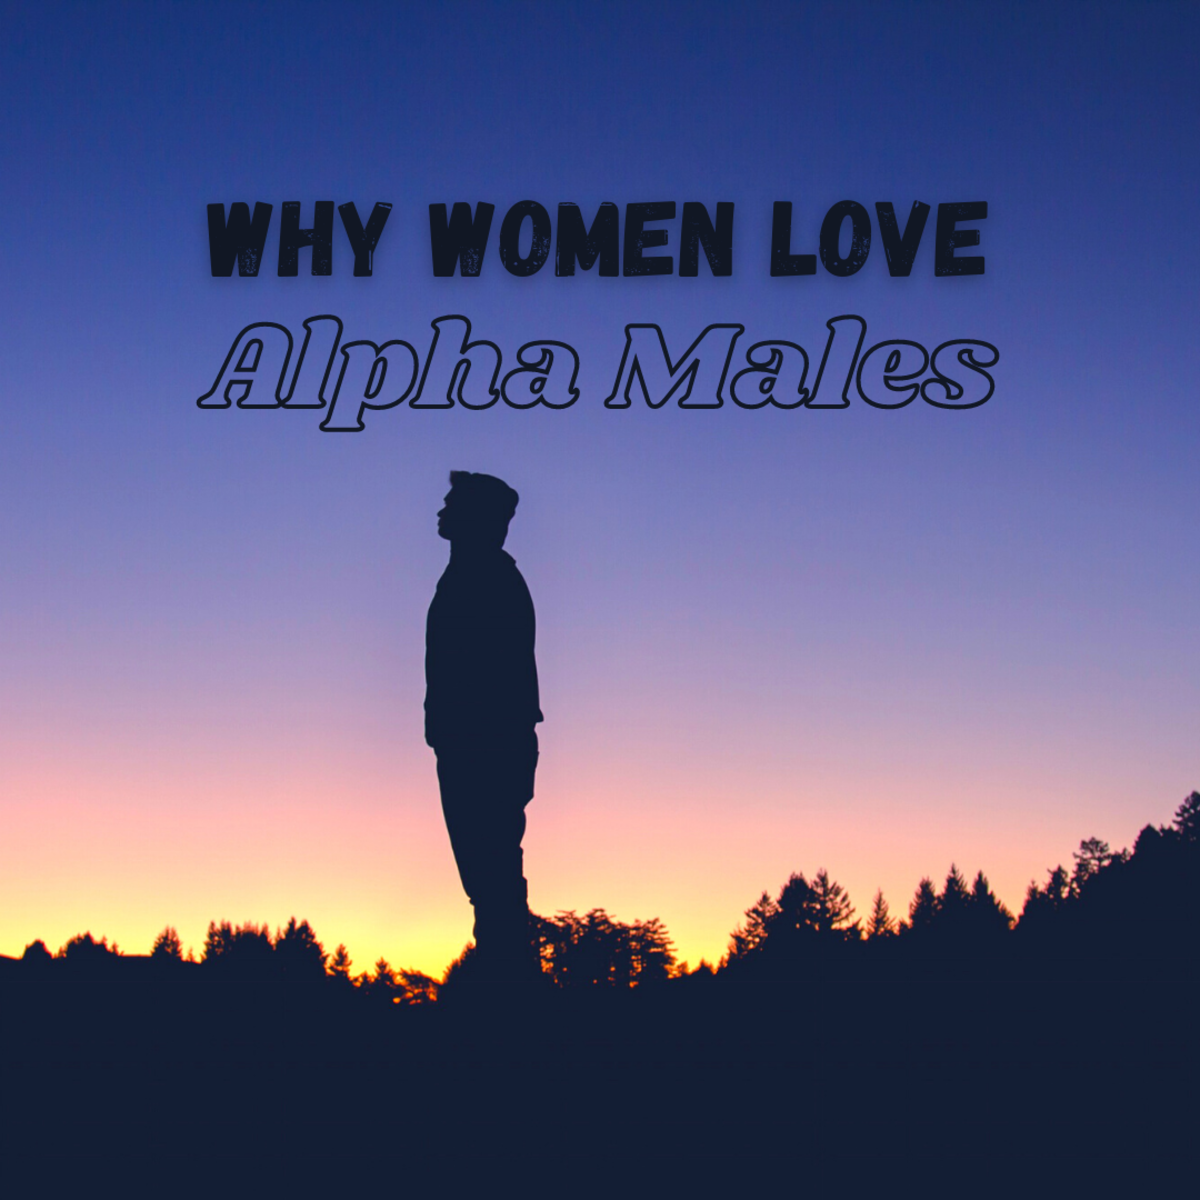 Why are women attracted to alpha males?